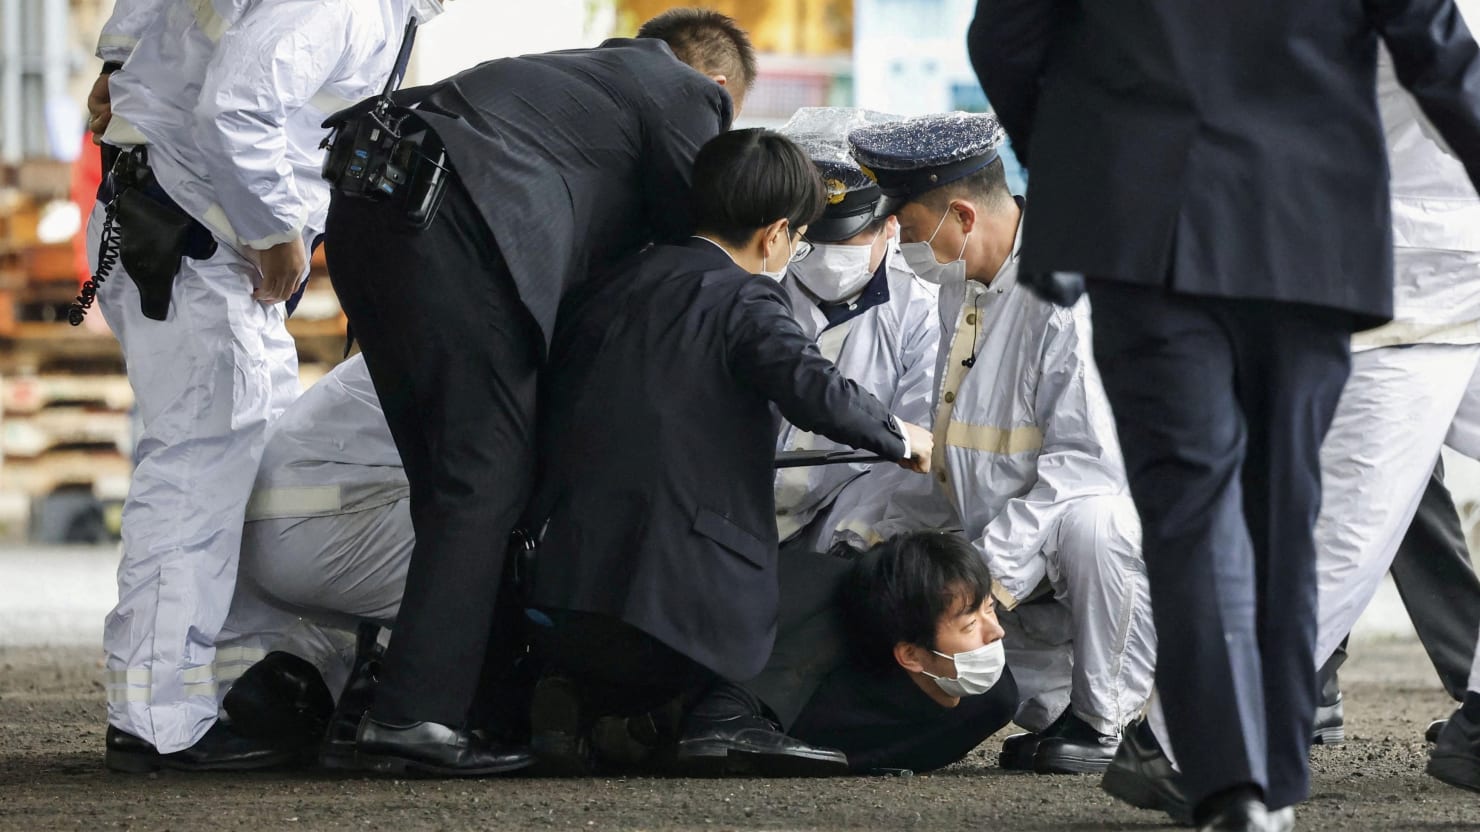 Hero Who Helped Save Japanese PM Flabbergasted by Lack of Security